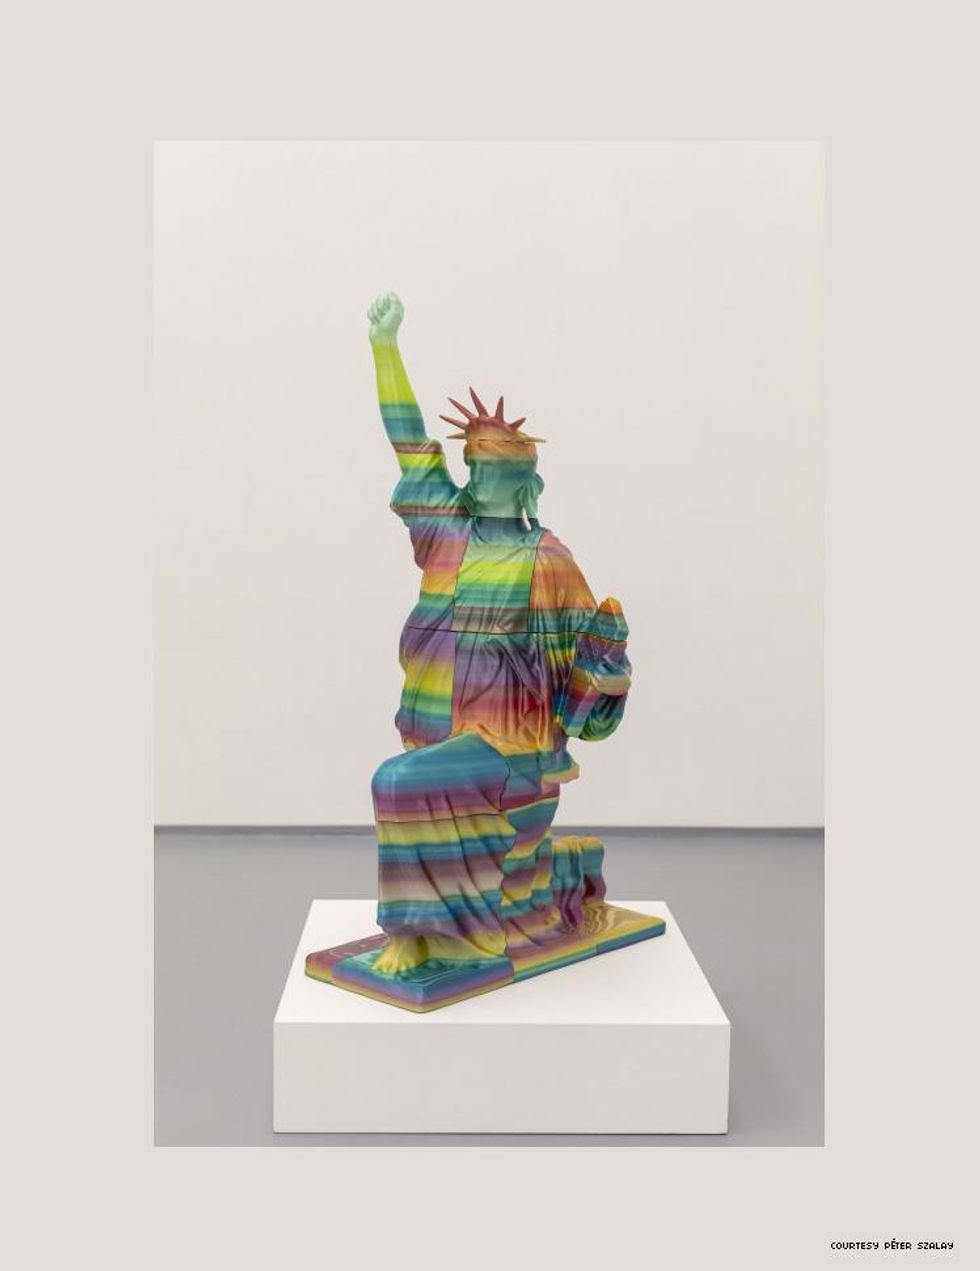 sculpture by peter szalay lady liberty kneeling with fist in air and Black Lives Matter written on her tablet